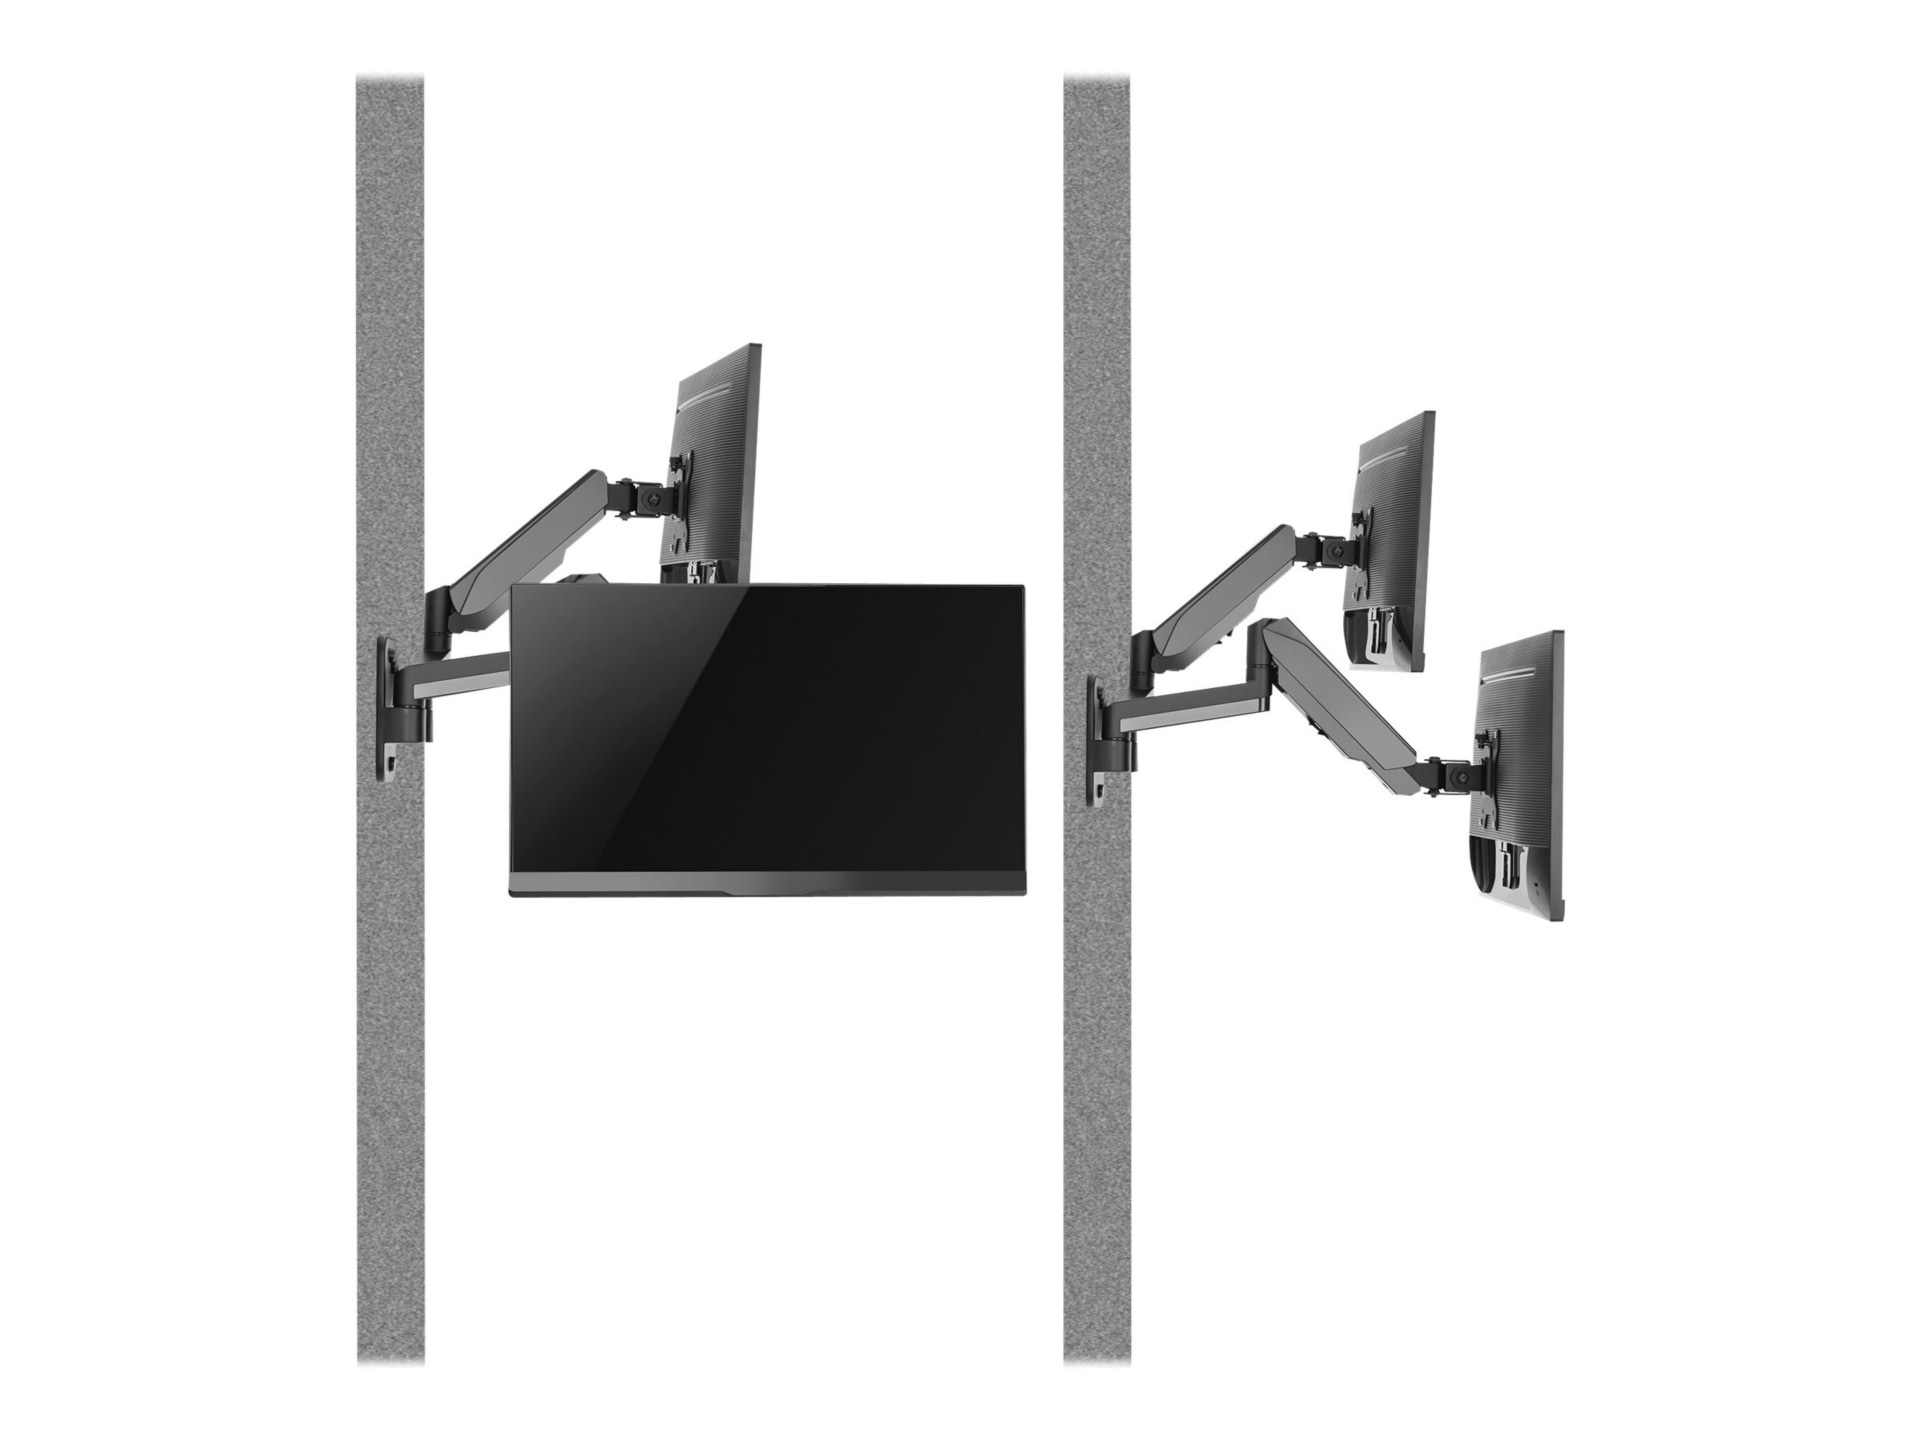 SIIG High Premium Aluminum Gas Spring Wall Mount Dual Monitor 17" to 32" bracket - full-motion adjustable arm - for 2